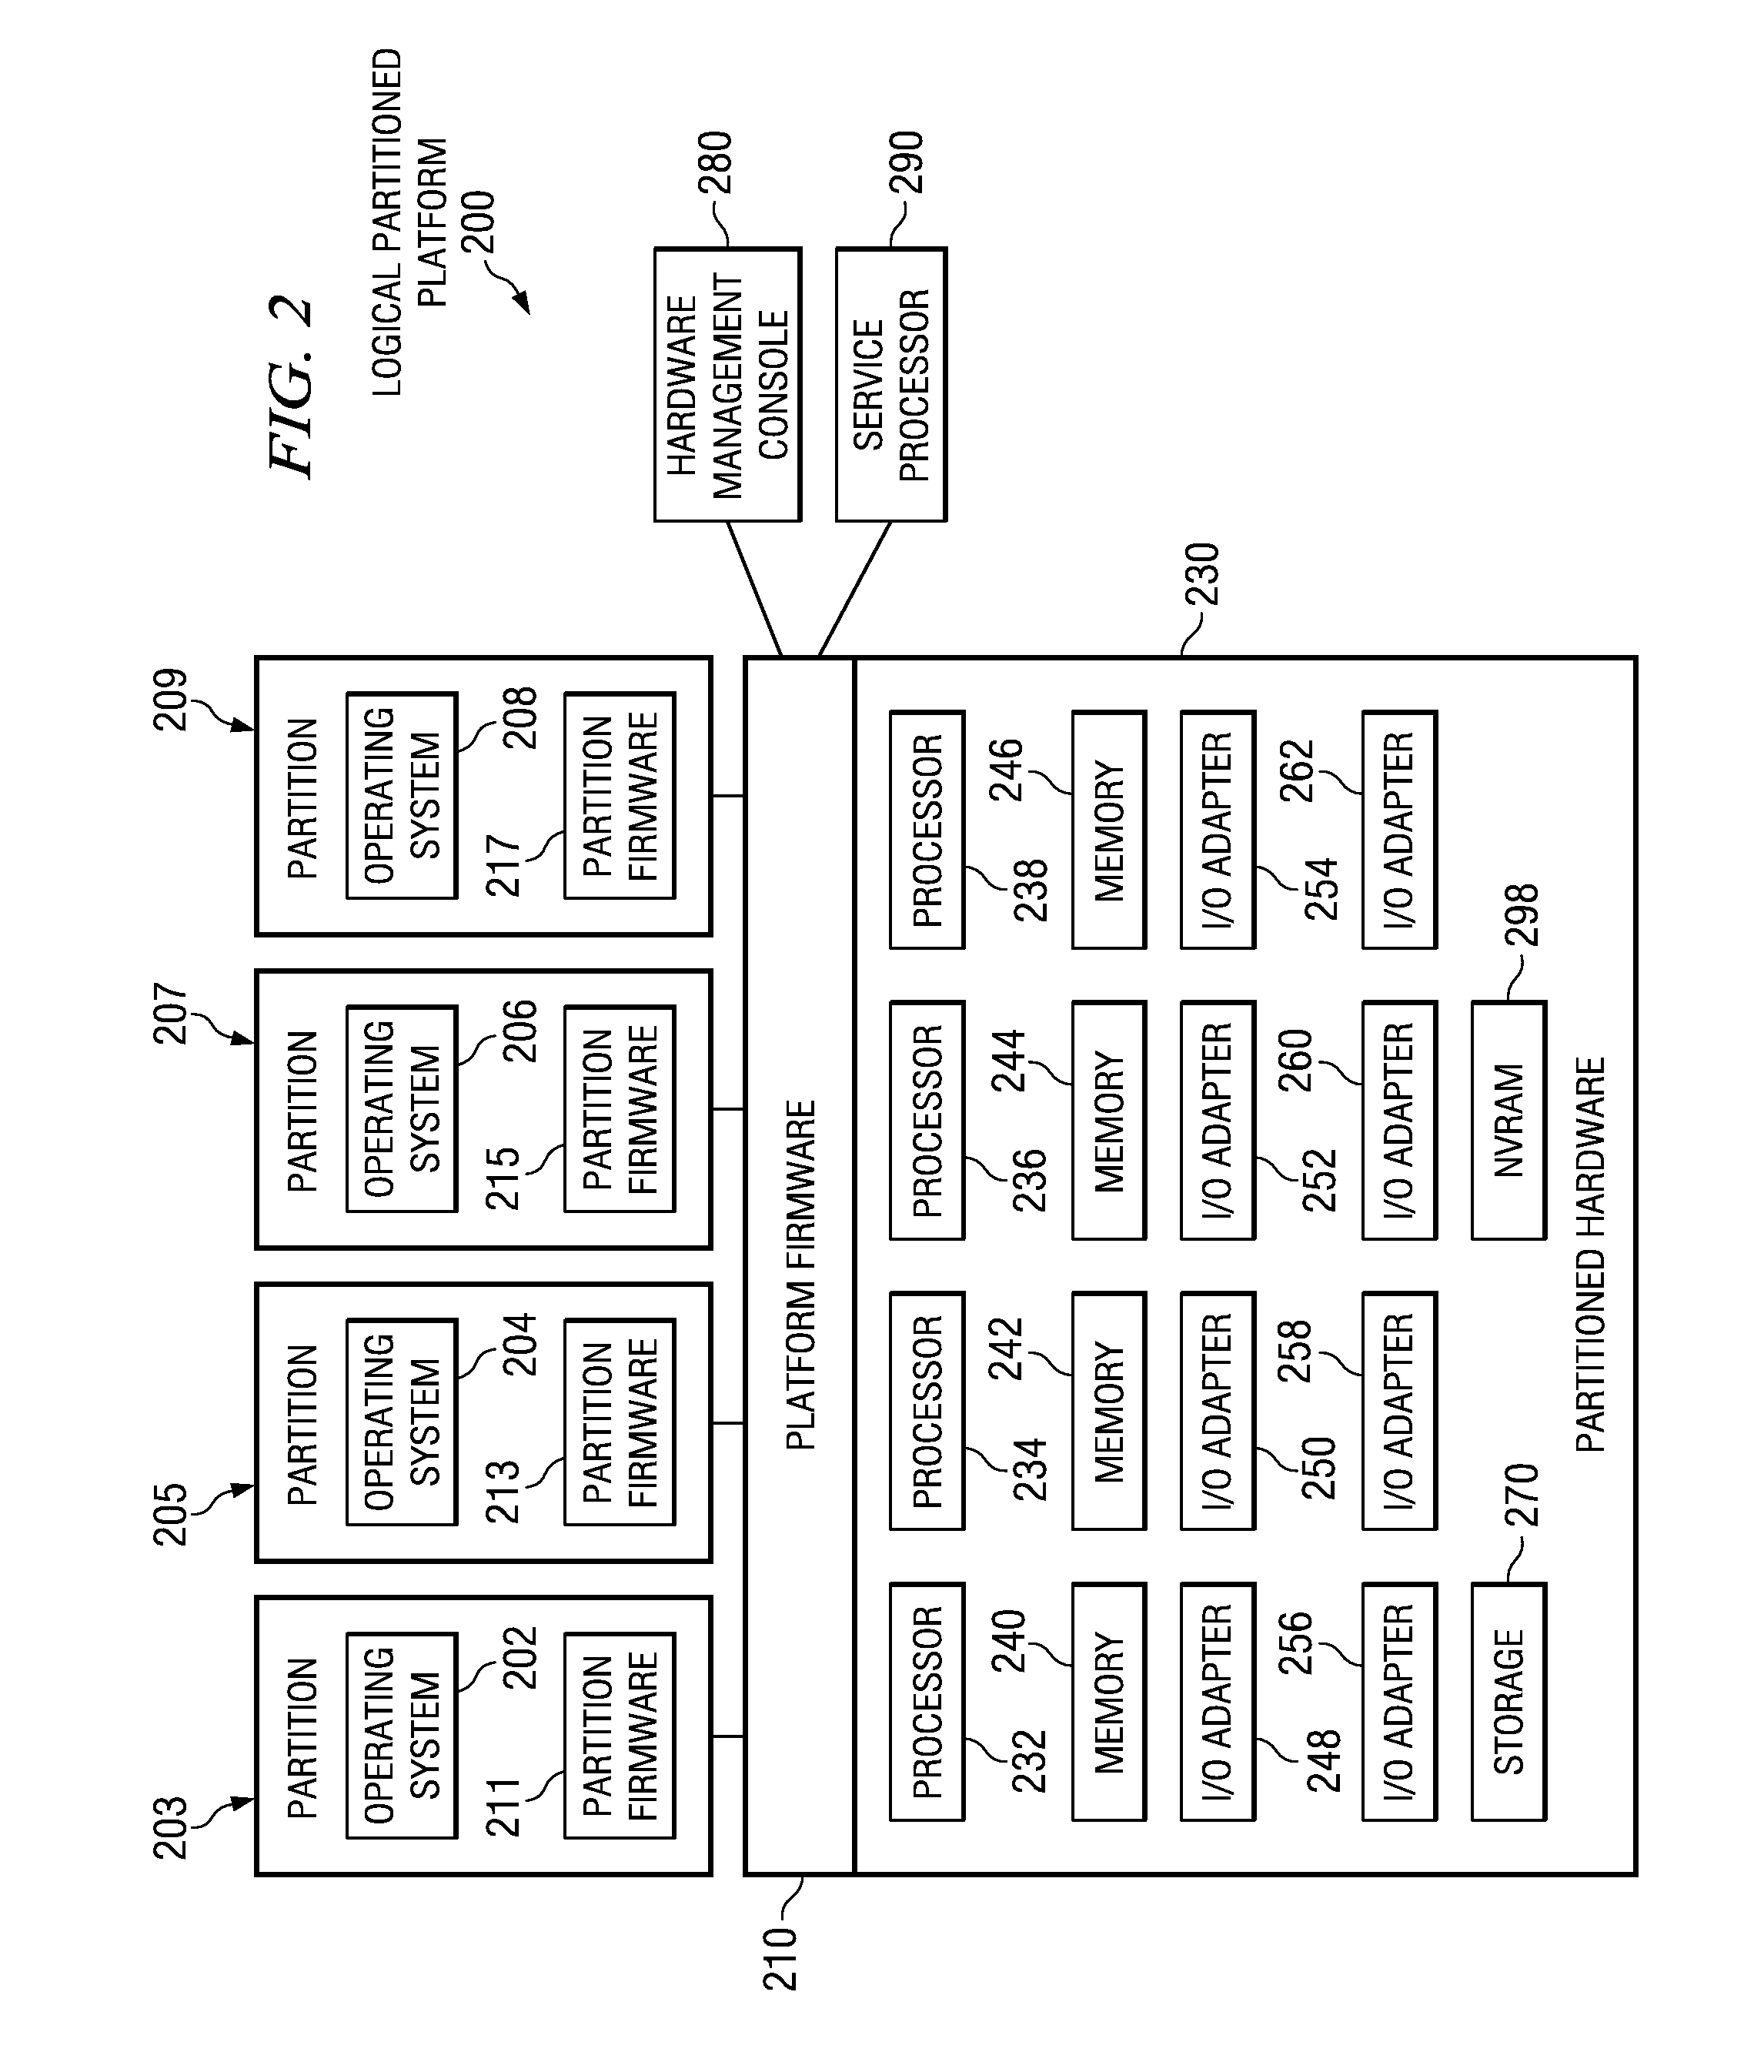 Bus/device/function translation within and routing of communications packets in a PCI switched-fabric in a multi-host environment environment utilizing a root switch